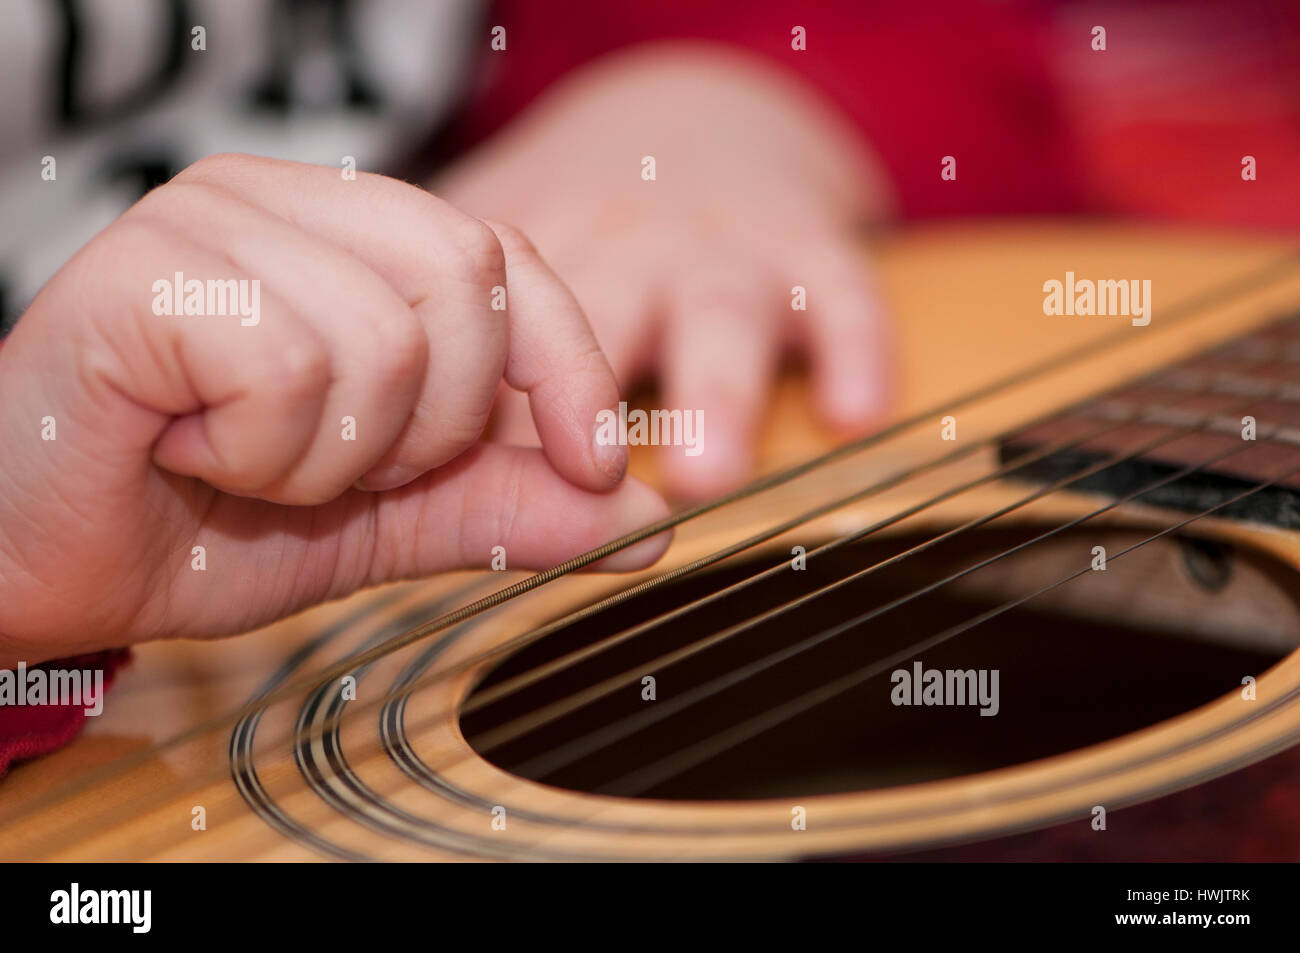 A 3 YEAR OLD CAUCASIAN BOY STRUMS A GUITAR. Stock Photo